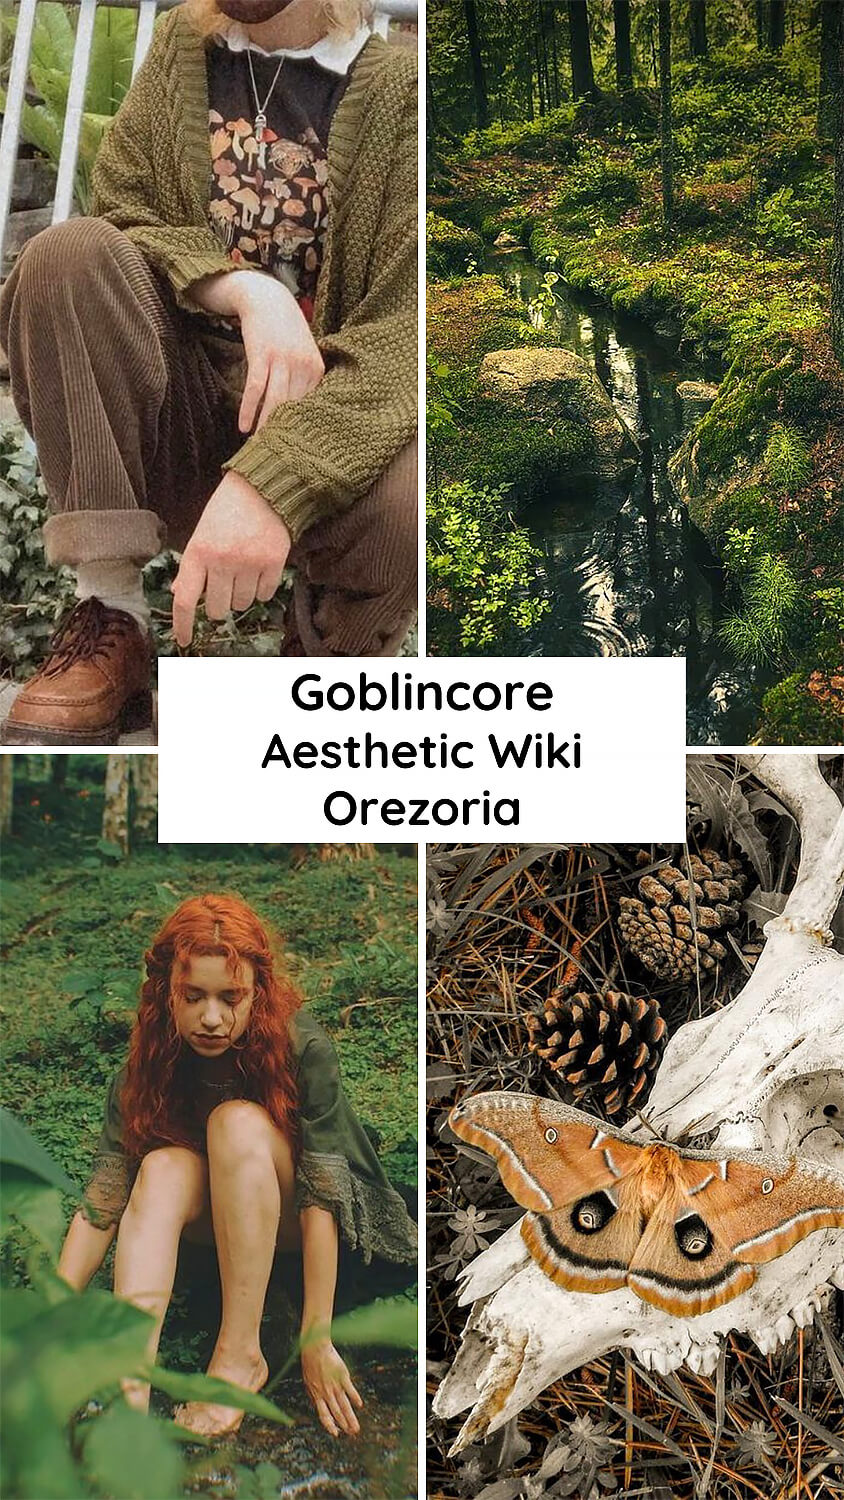 Goblincore Is The Cottagecore-Adjacent Internet Aesthetic That